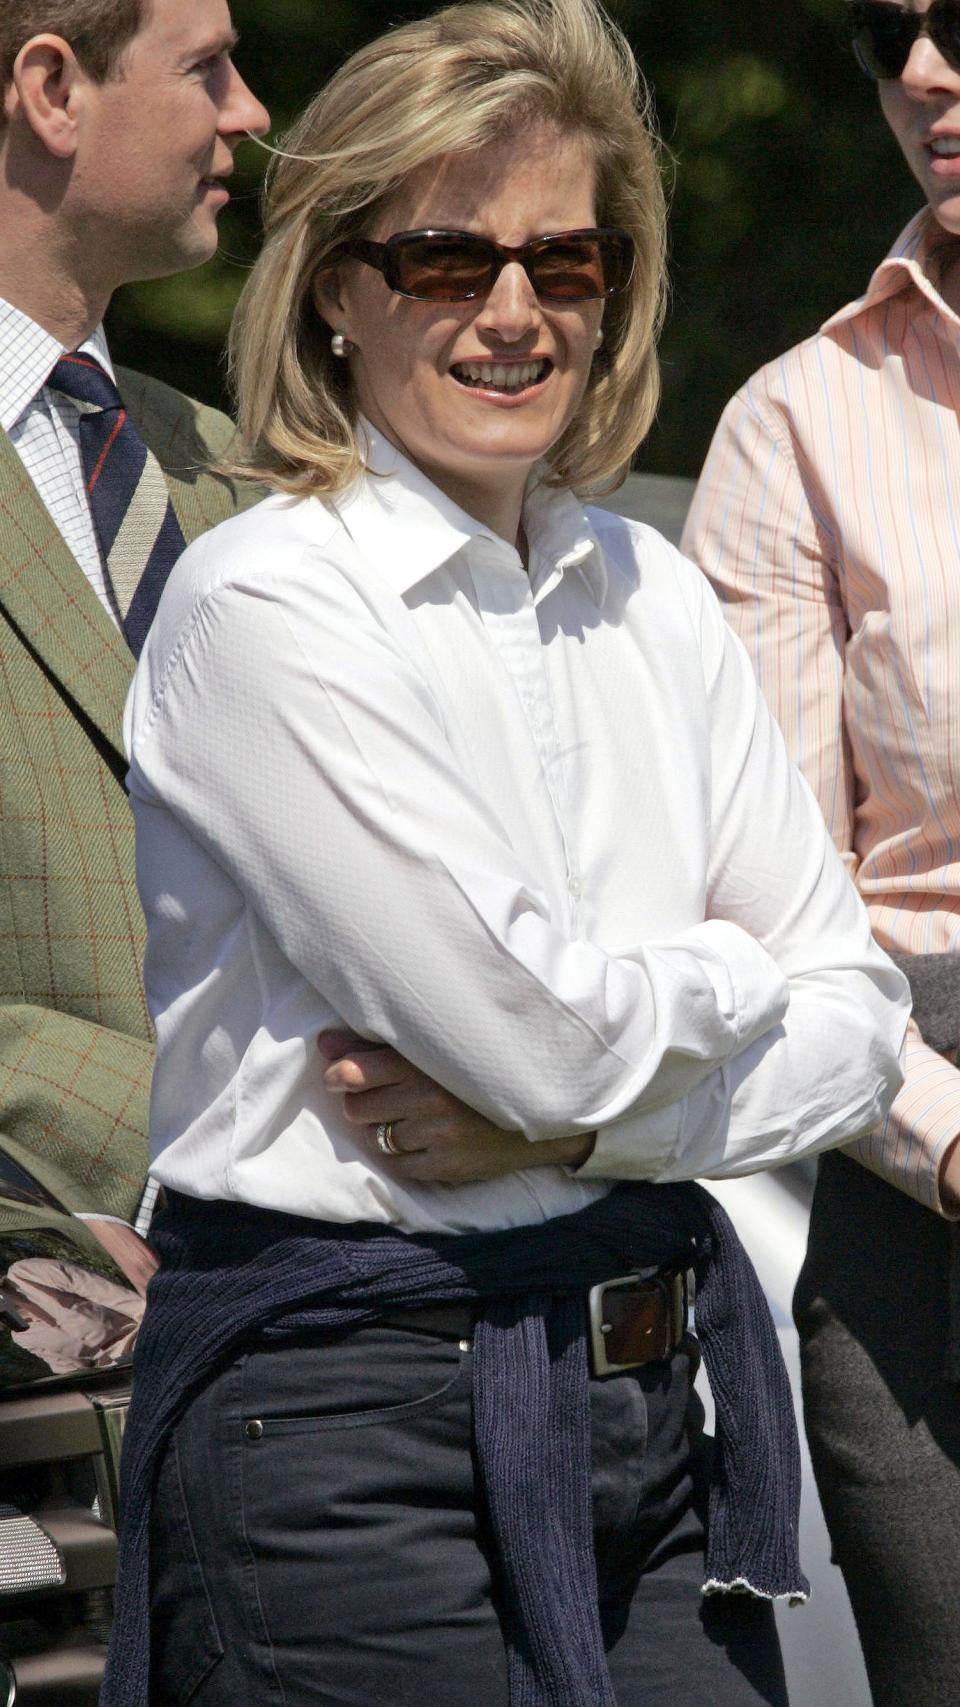 Duchess Sophie at the Royal Windsor Horse Show in 2005